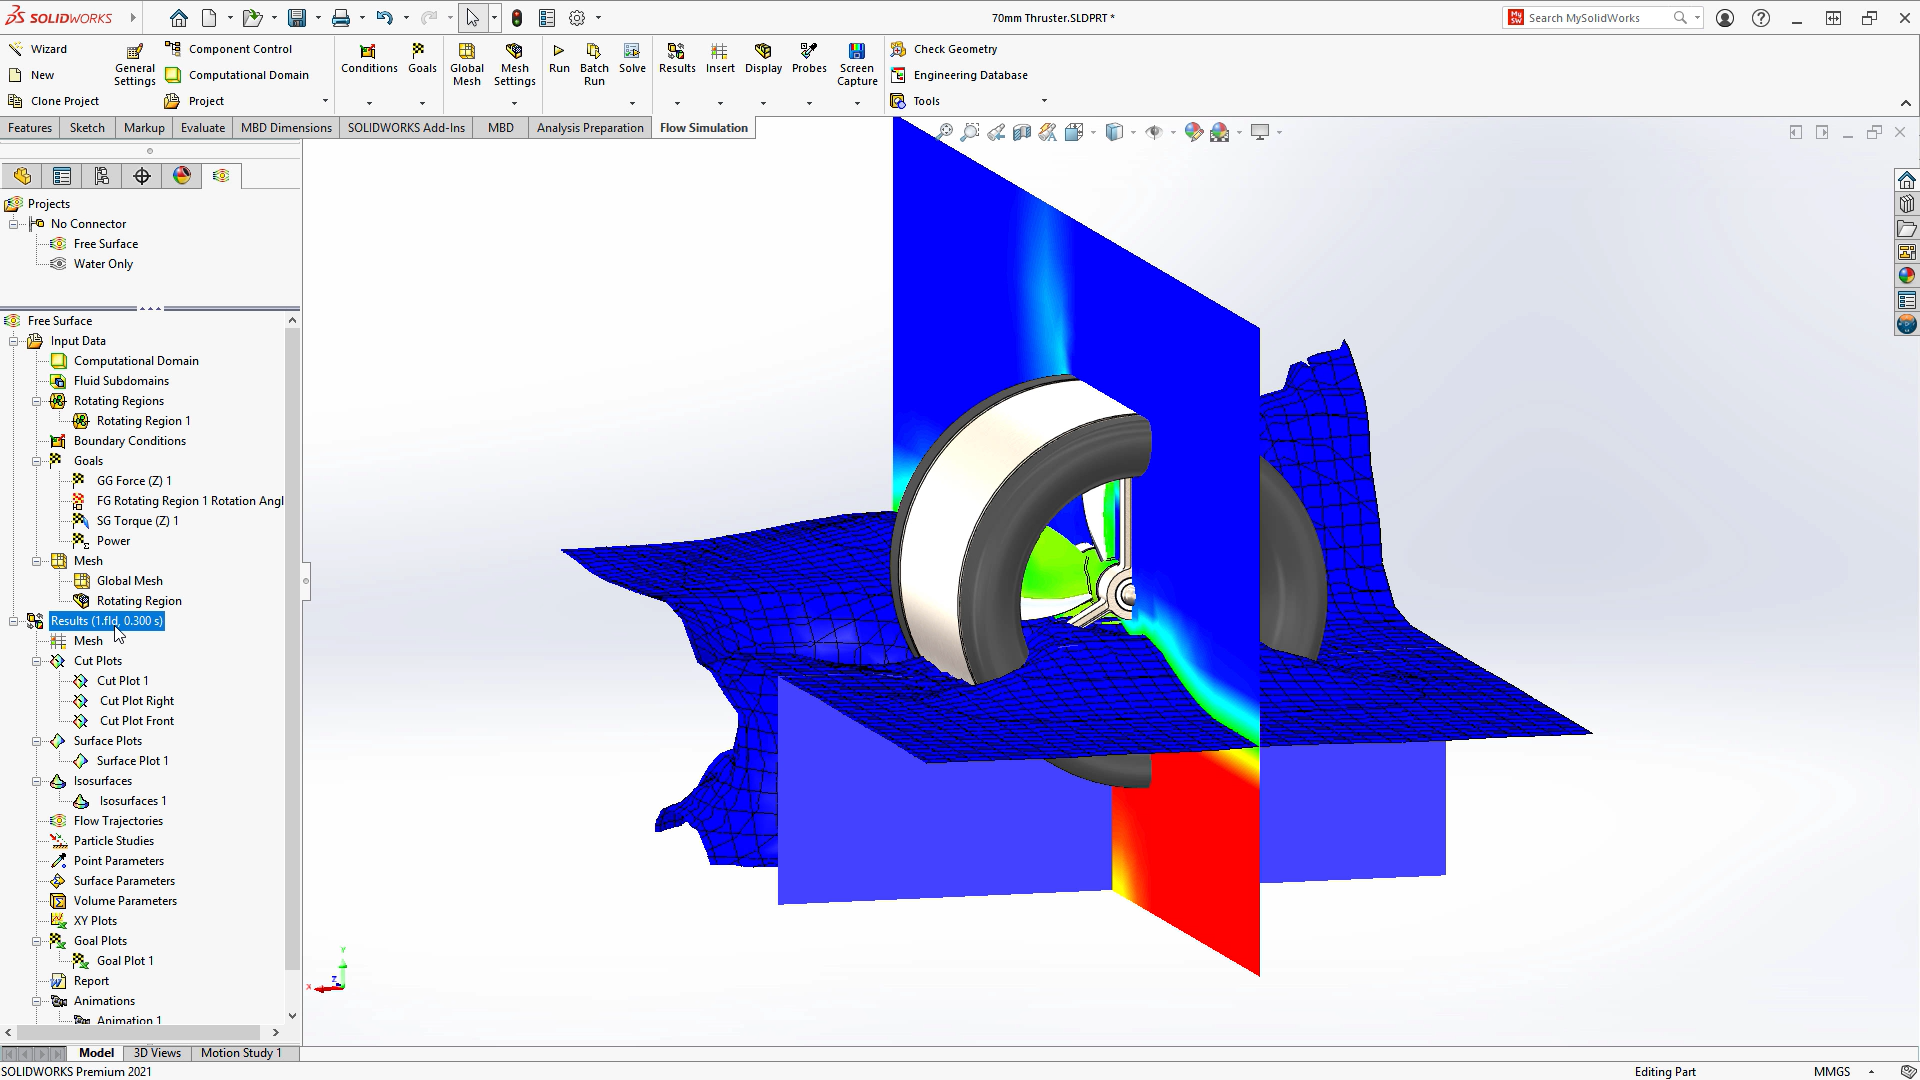 What's New in SOLIDWORKS Flow Simulation 2021